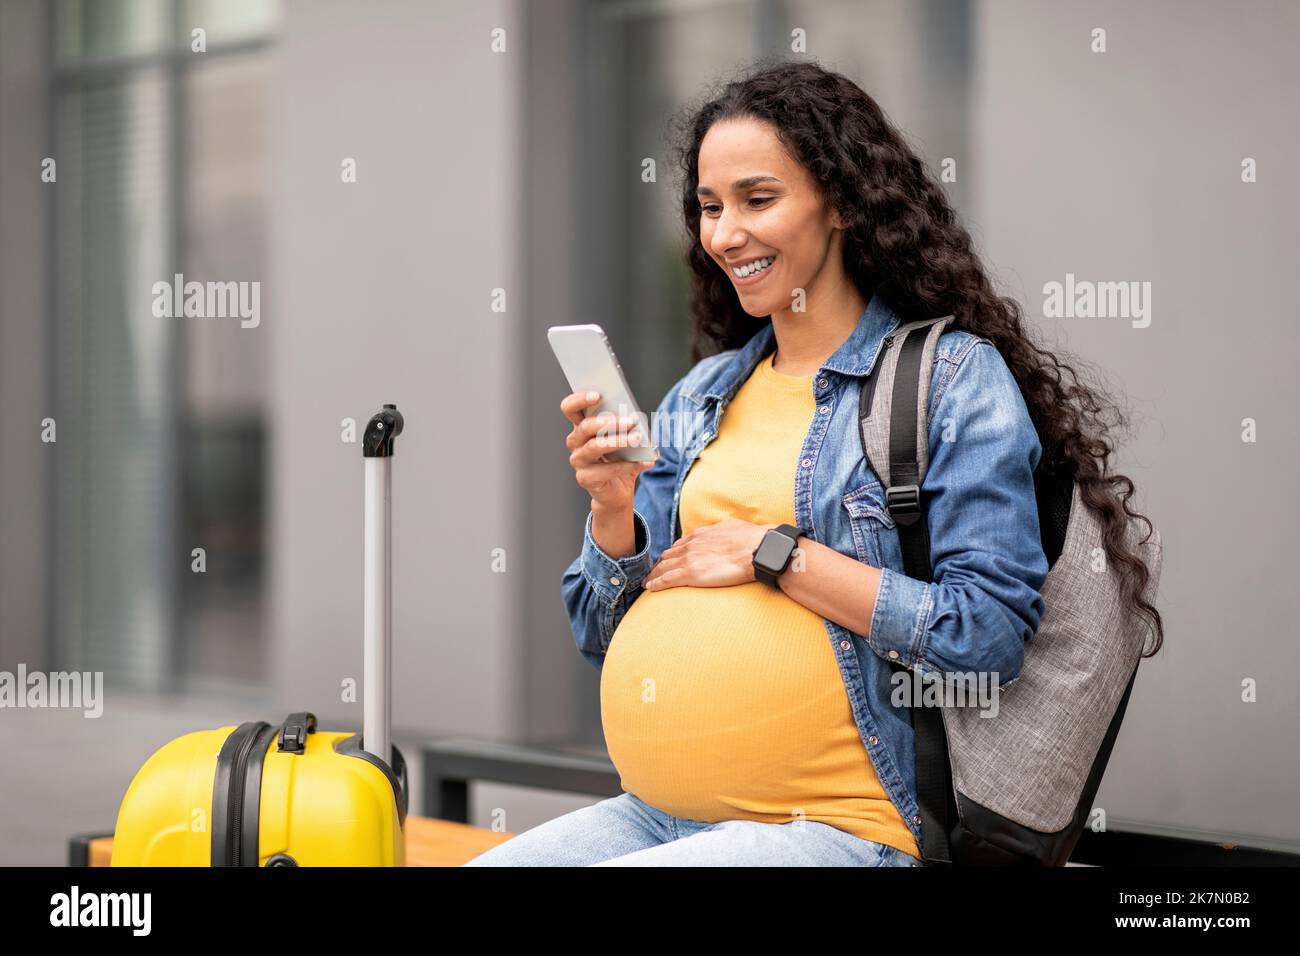 Cheerful young pregnant woman travelling alone, using smartphone at airport Stock Photo